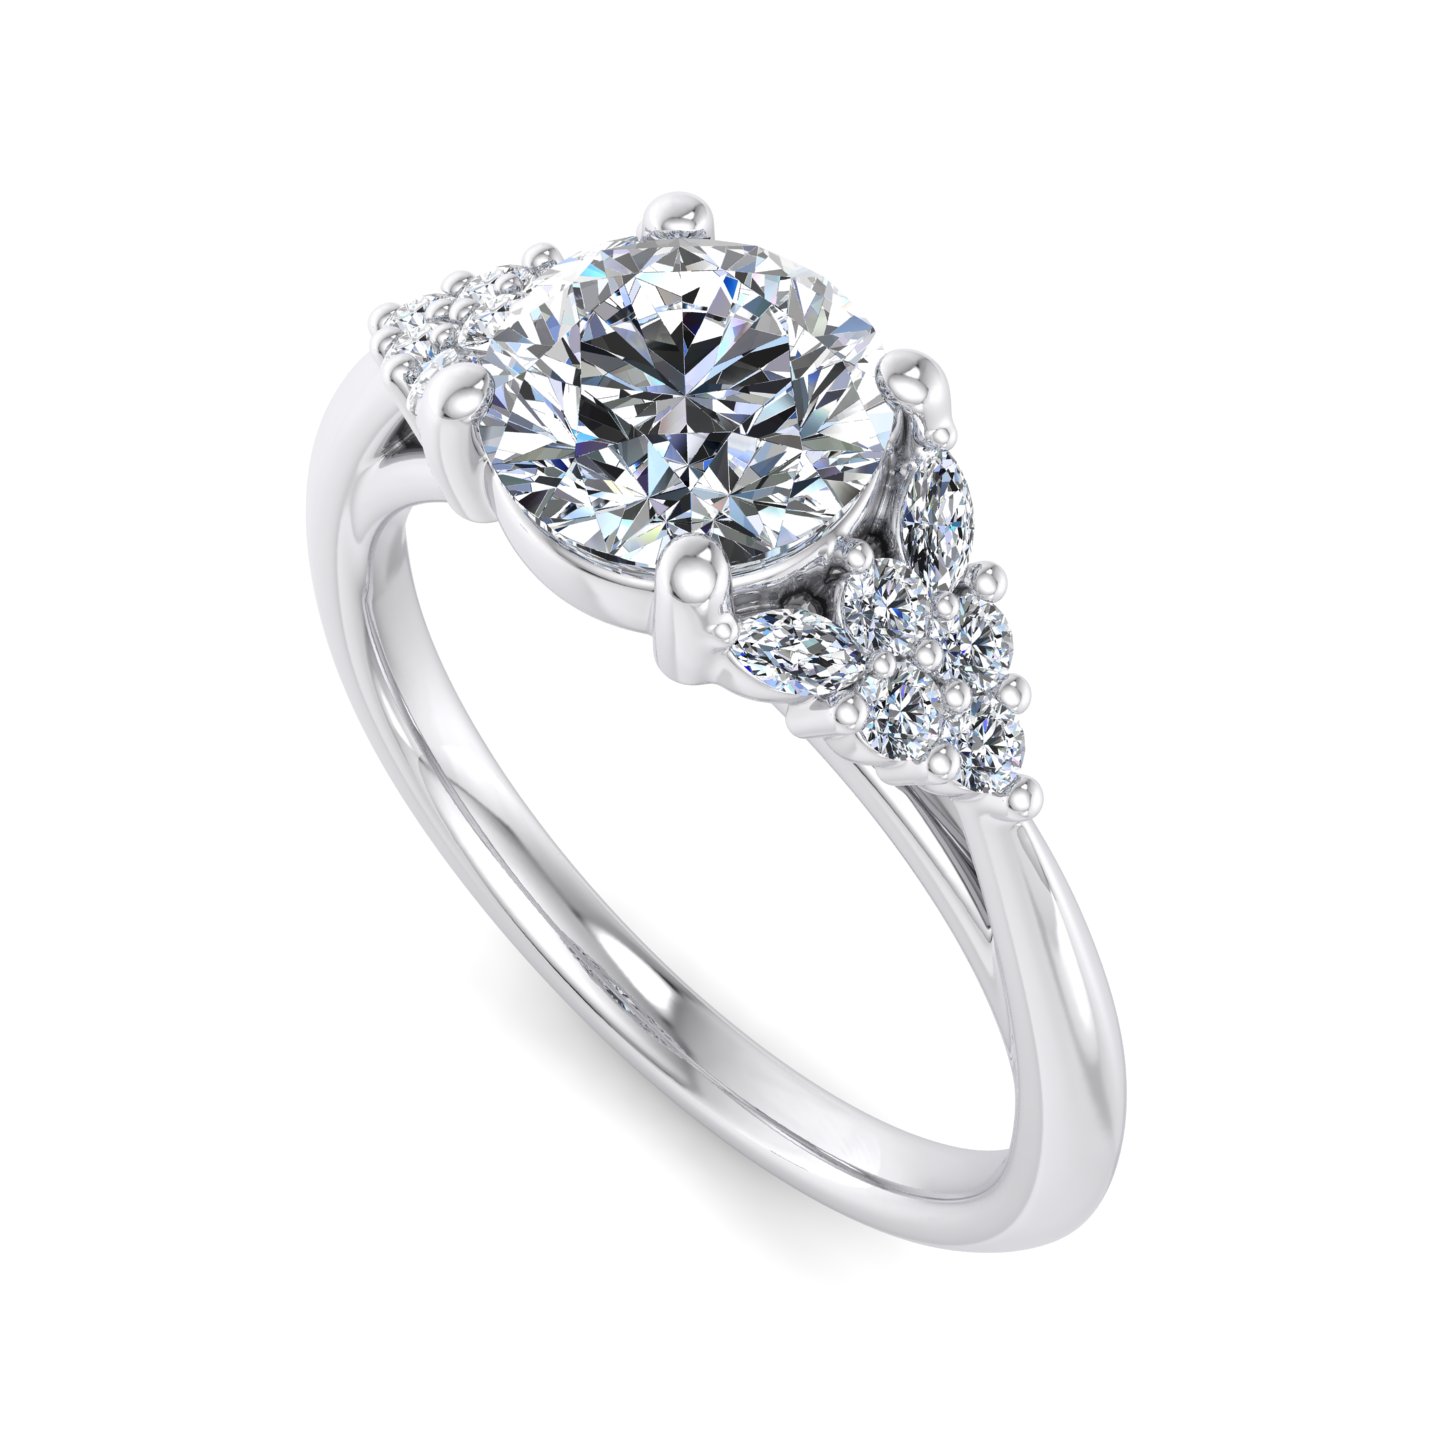 Korman Signature Allison Accented Engagement Ring Setting